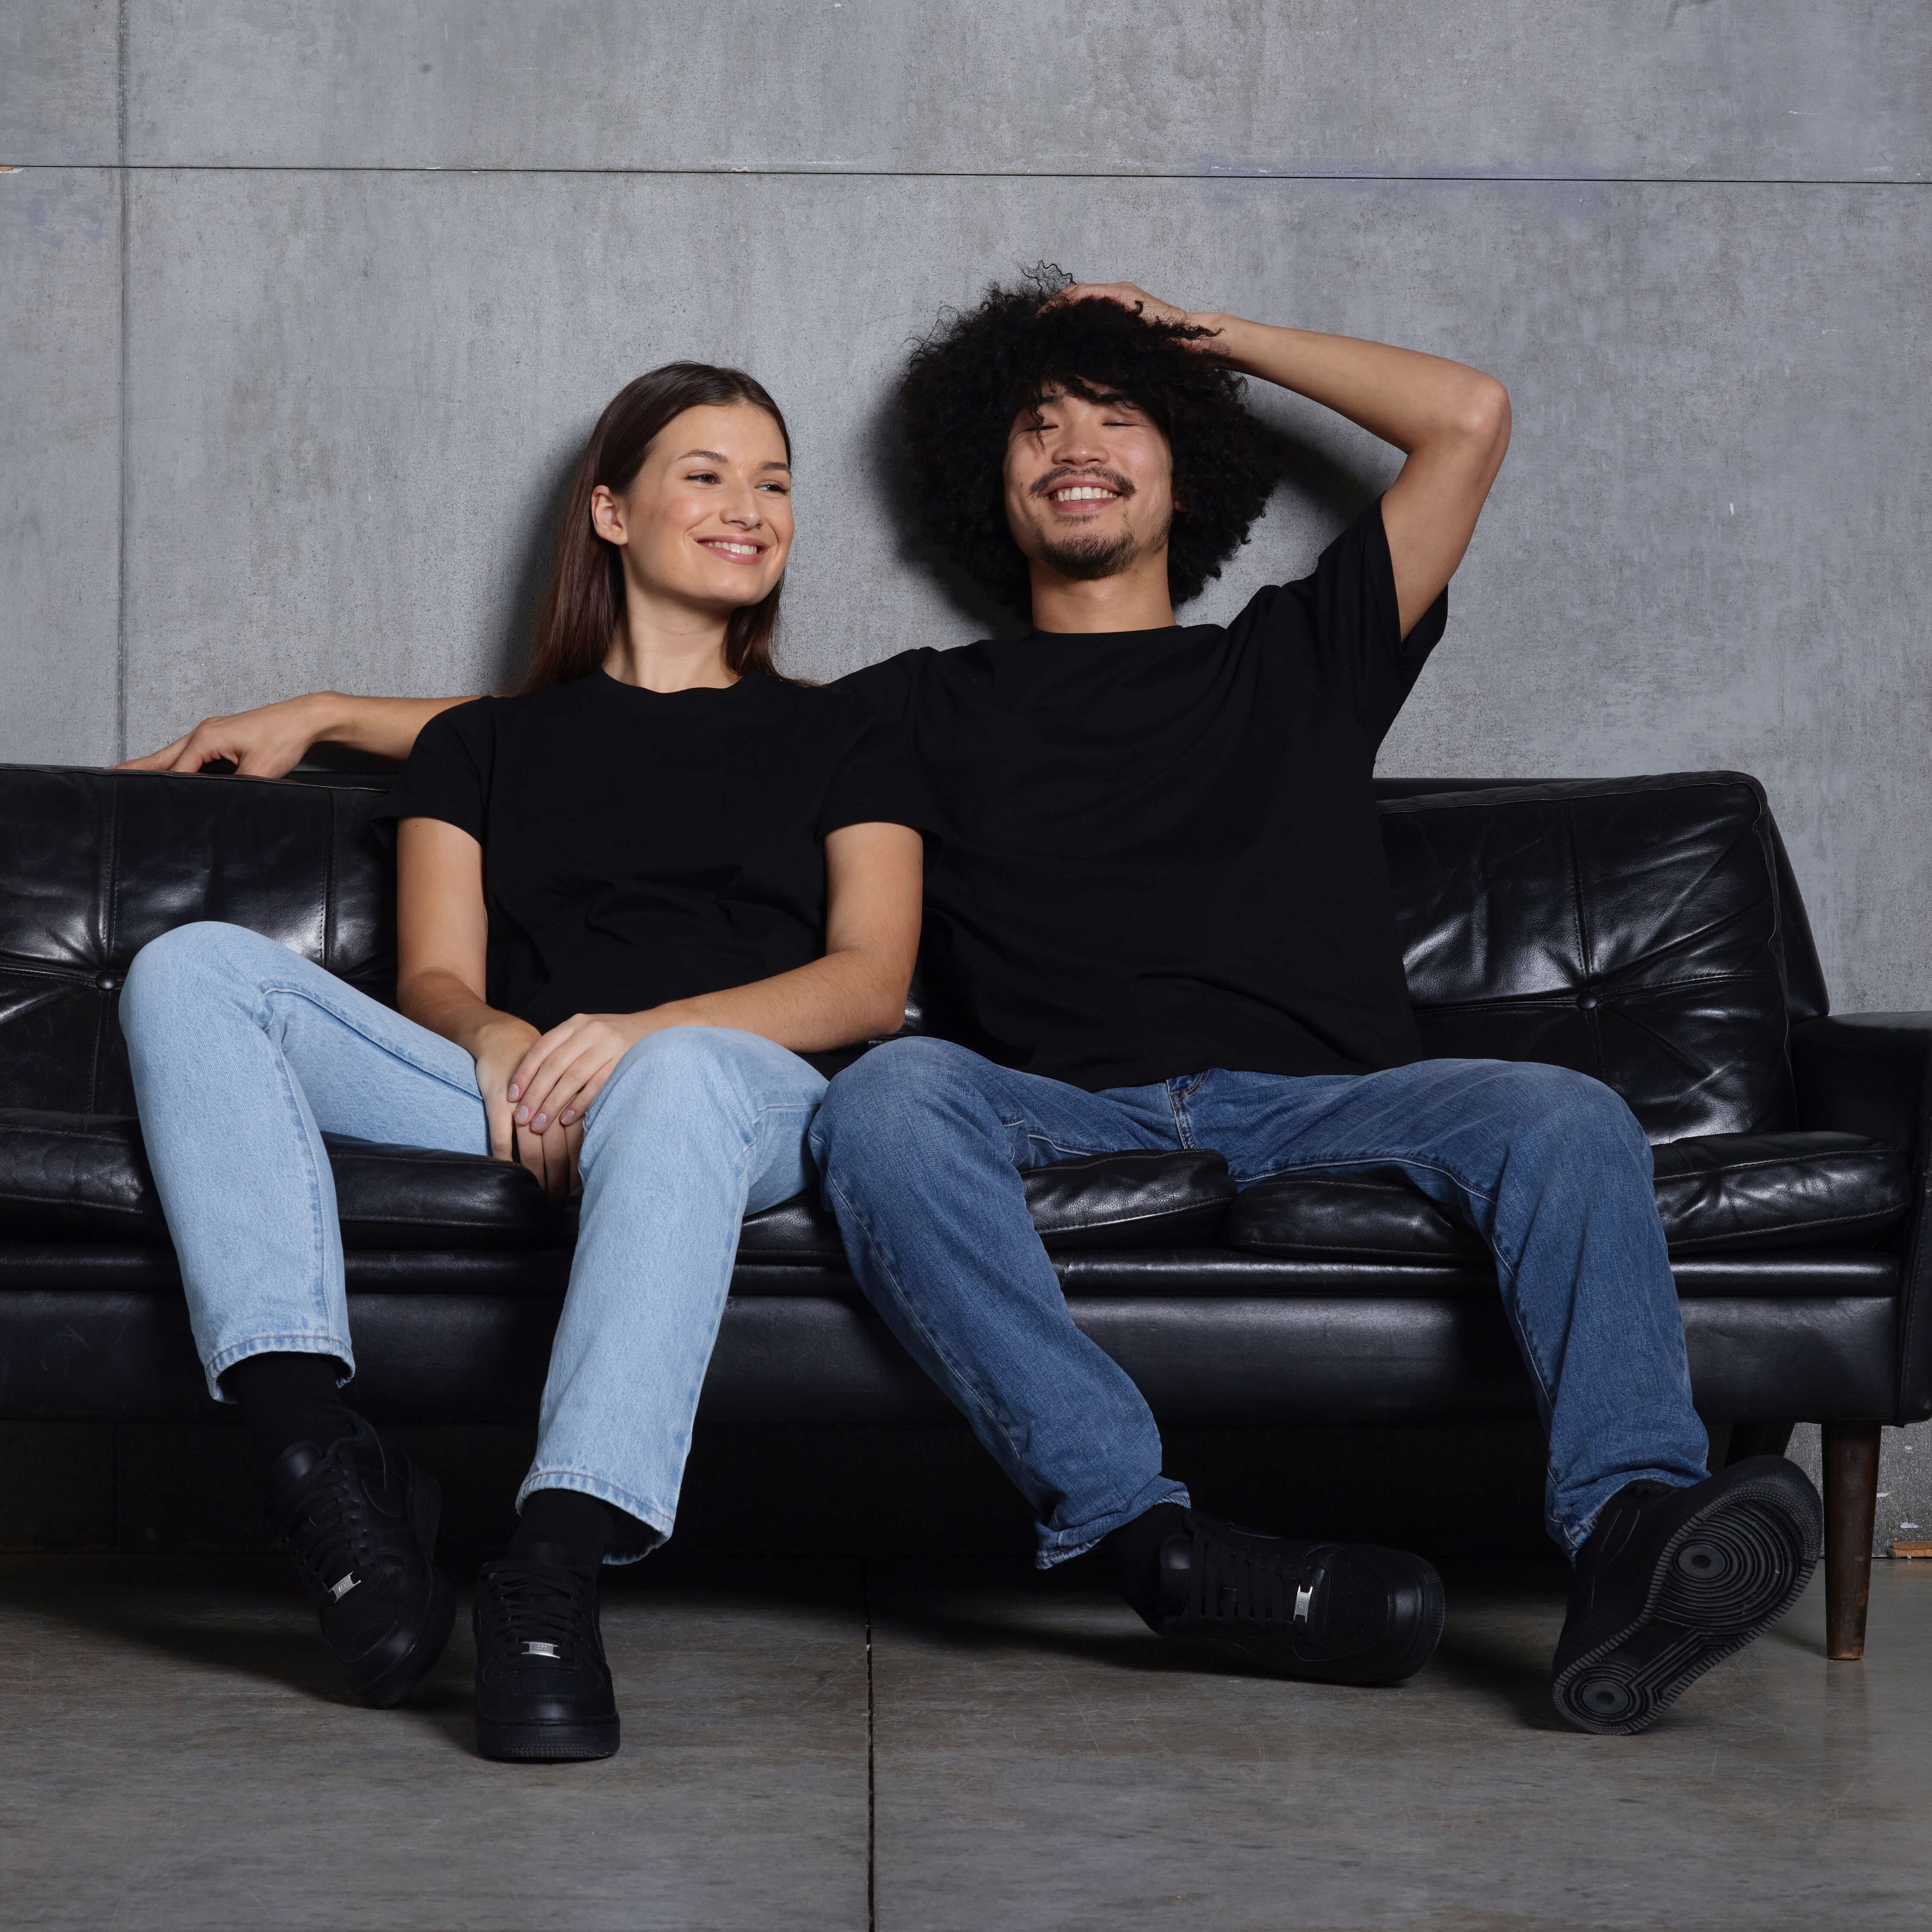 A man and woman sitting on a leather sofa, smiling, both wearing plain black t-shirts.